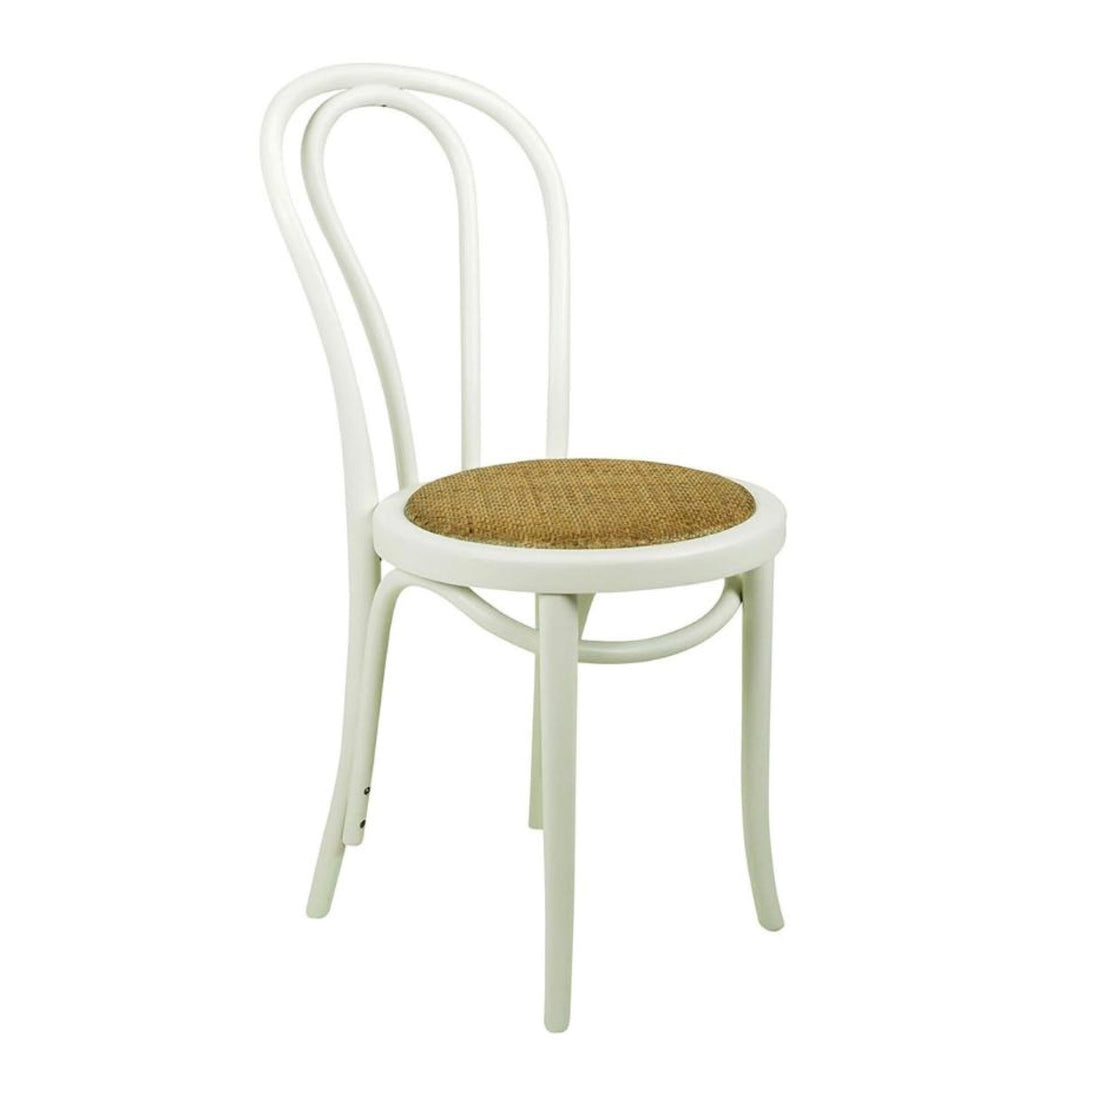 Bentwood Style Chair Dining Furniture Beachwood Designs 